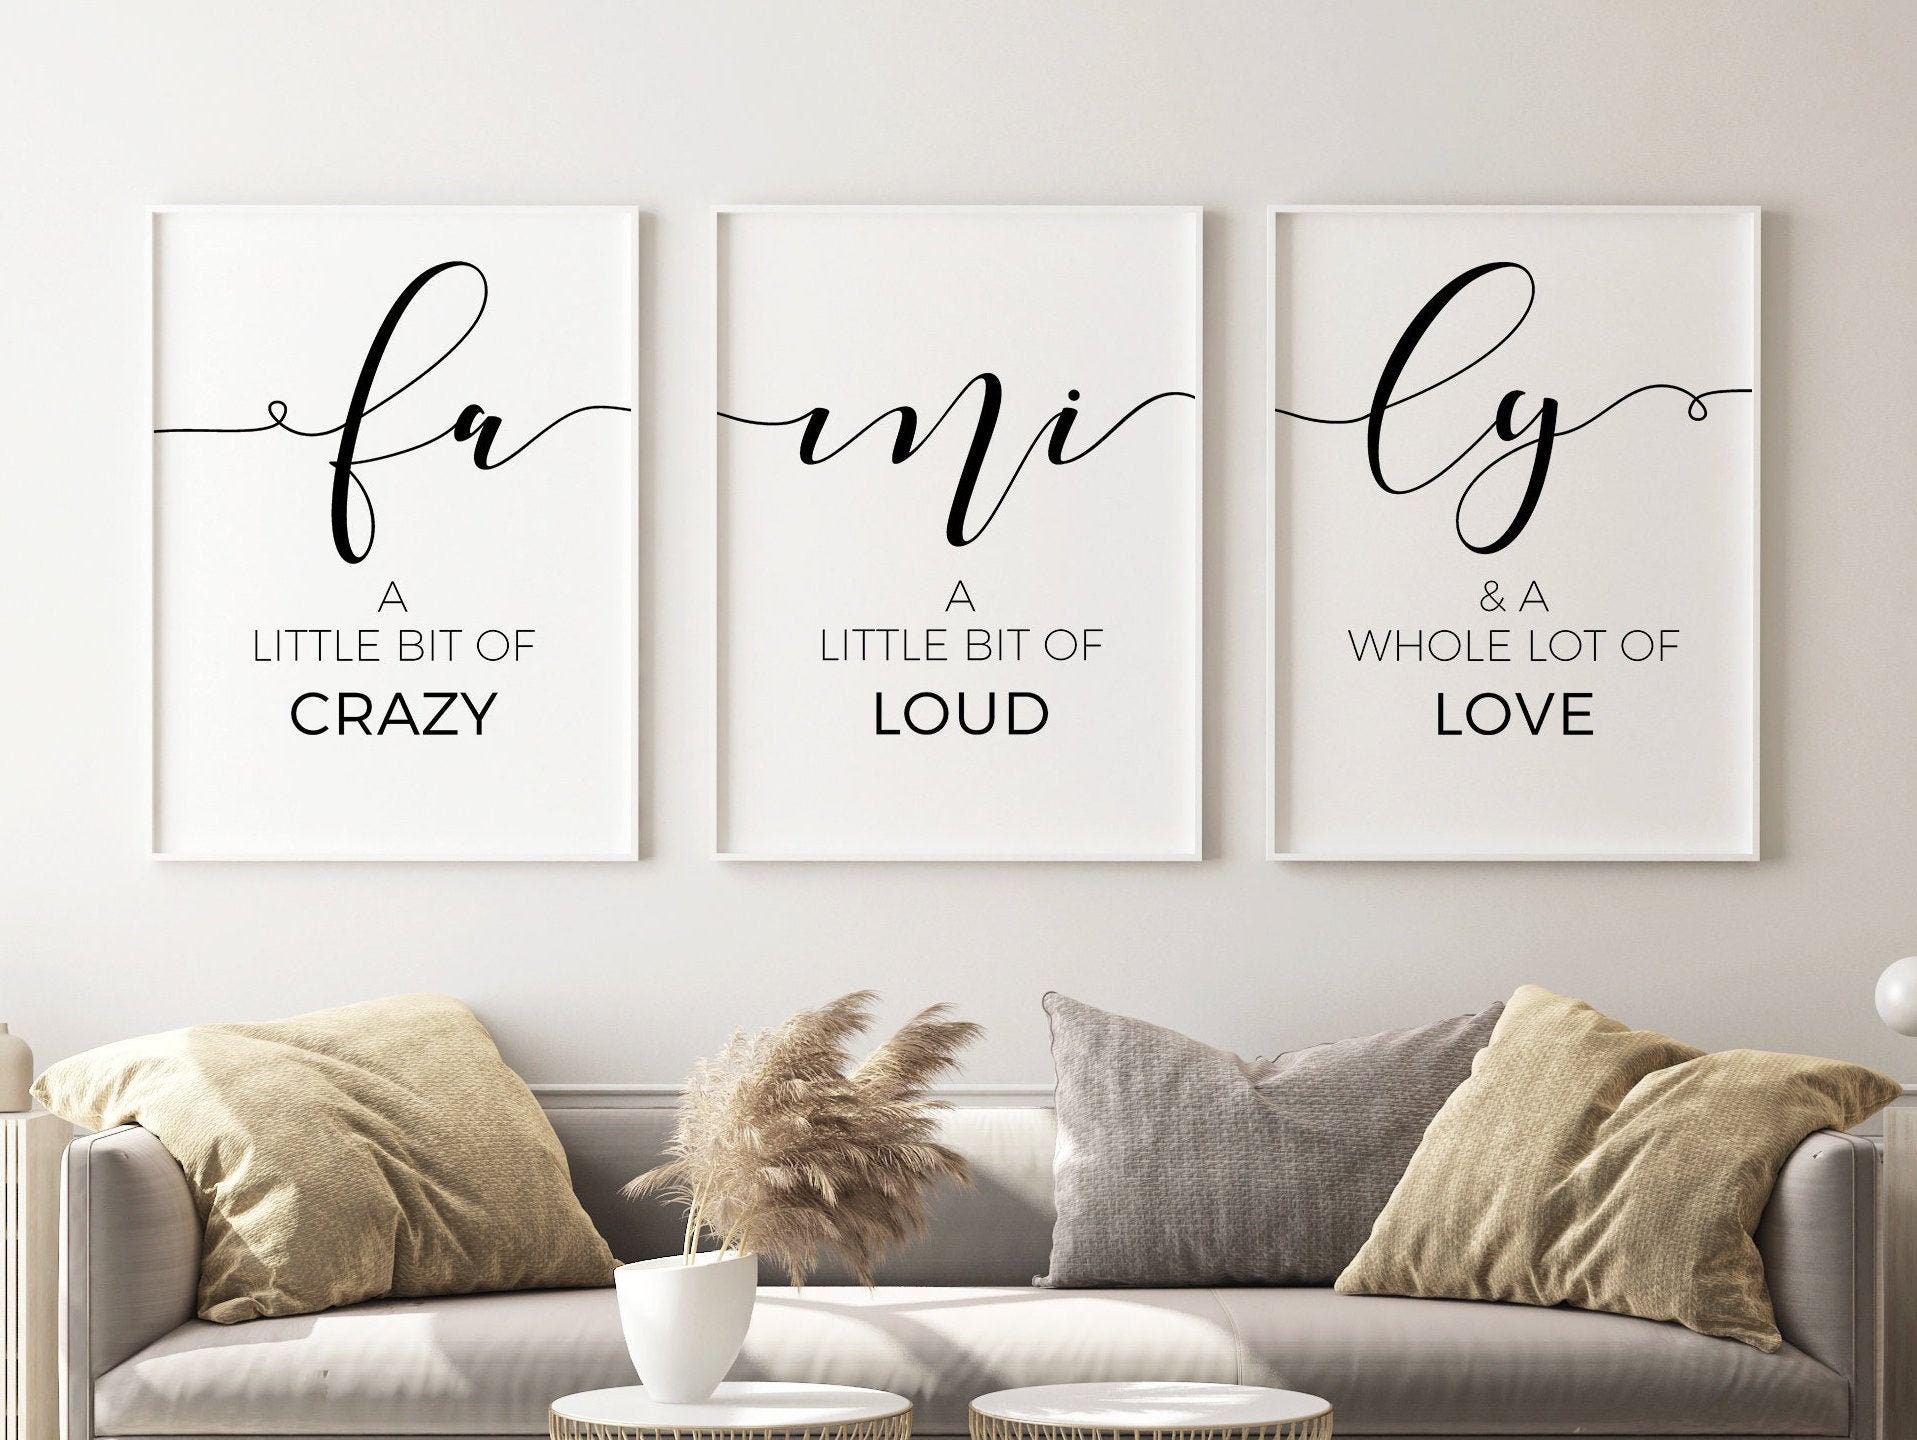 Above Couch Wall Decor Family Wall Art Printable Quotes Family Little Bit  of Crazy Living Room Family Signs Digital Download Prints Set of 3 